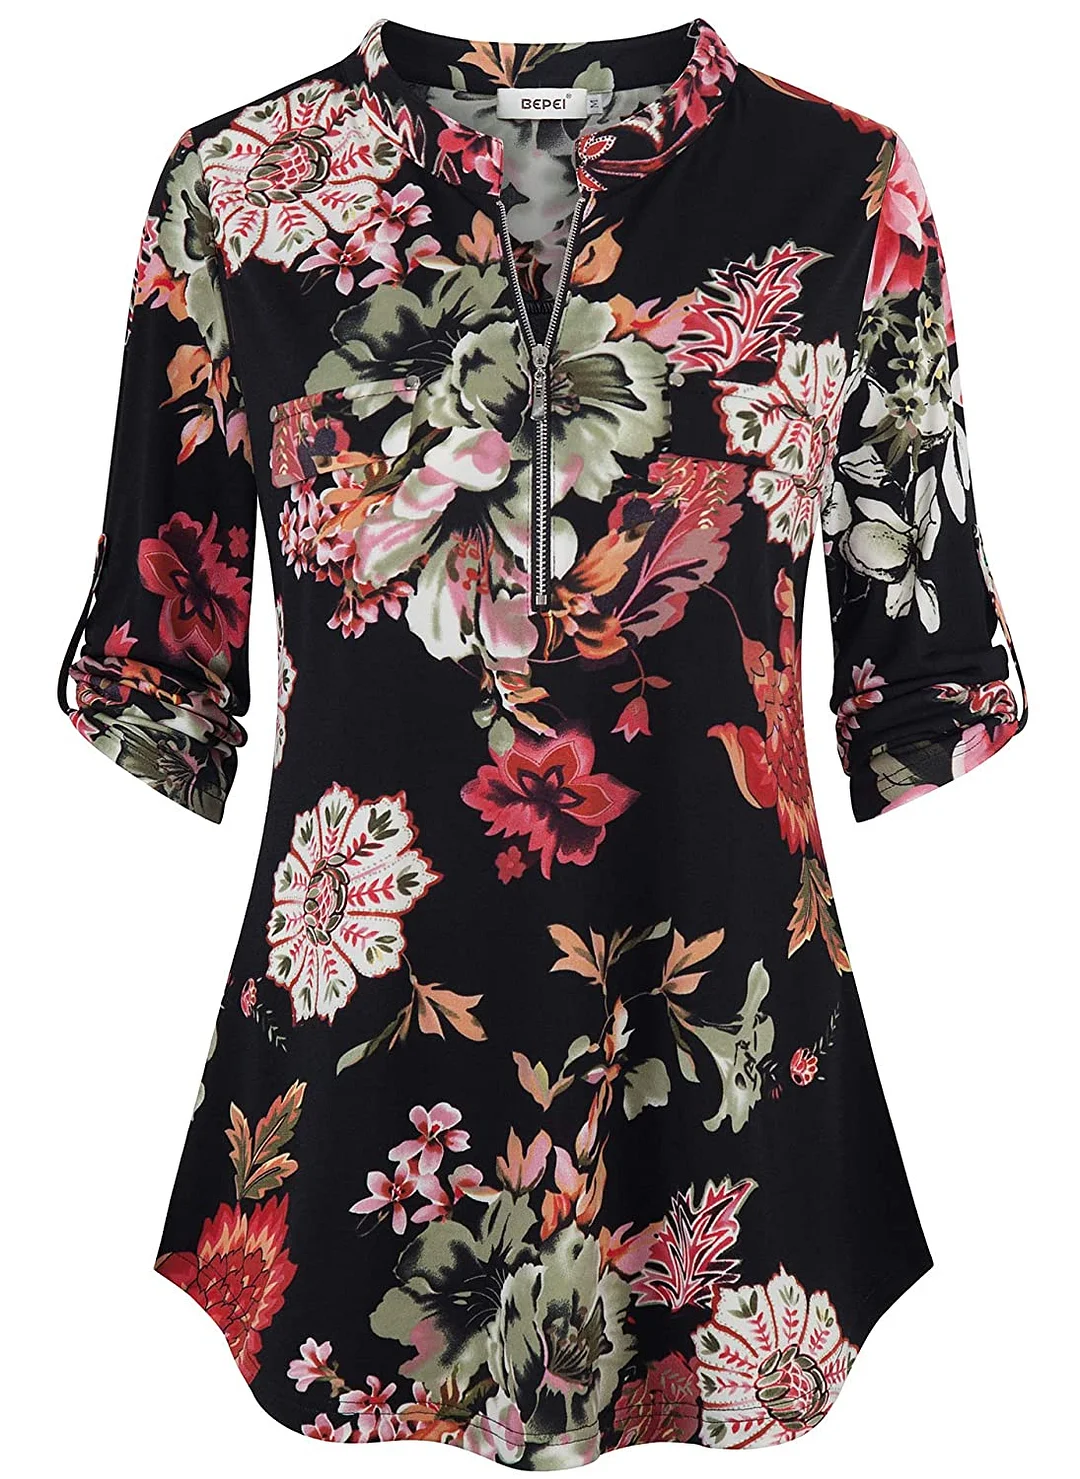 Womens Floral 3/4 Sleeve Shirts Zip up V Neck Work Chiffon Blouses Top